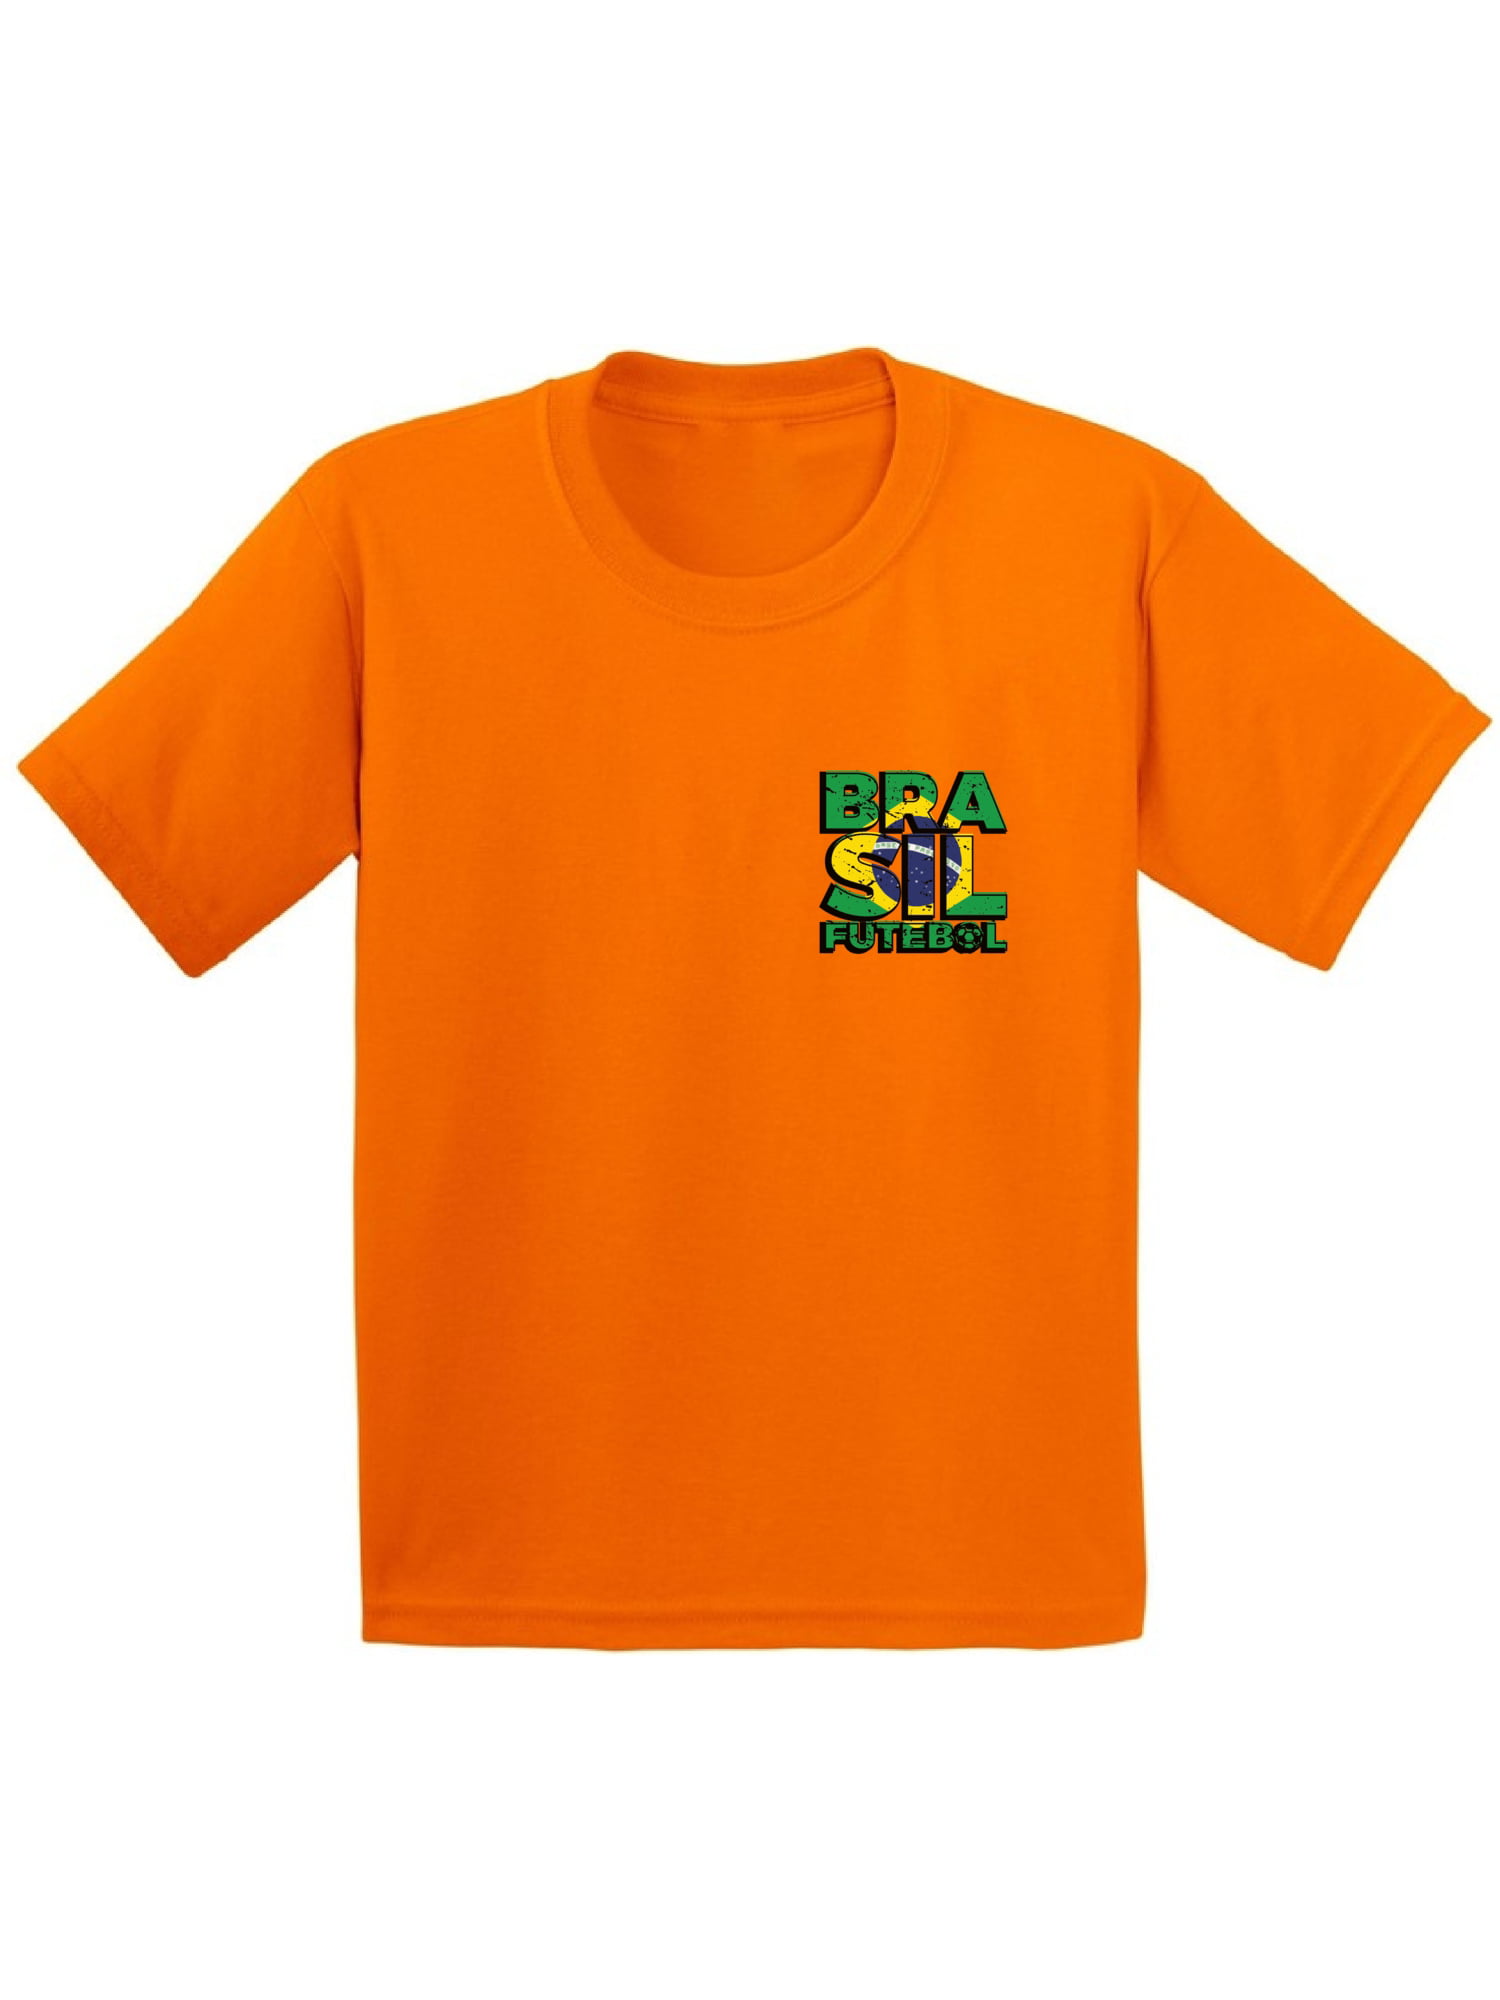 buzz shirts Brazil Boys or Girls Childrens Country Name and Badge Football Fan Organic Cotton T-Shirt